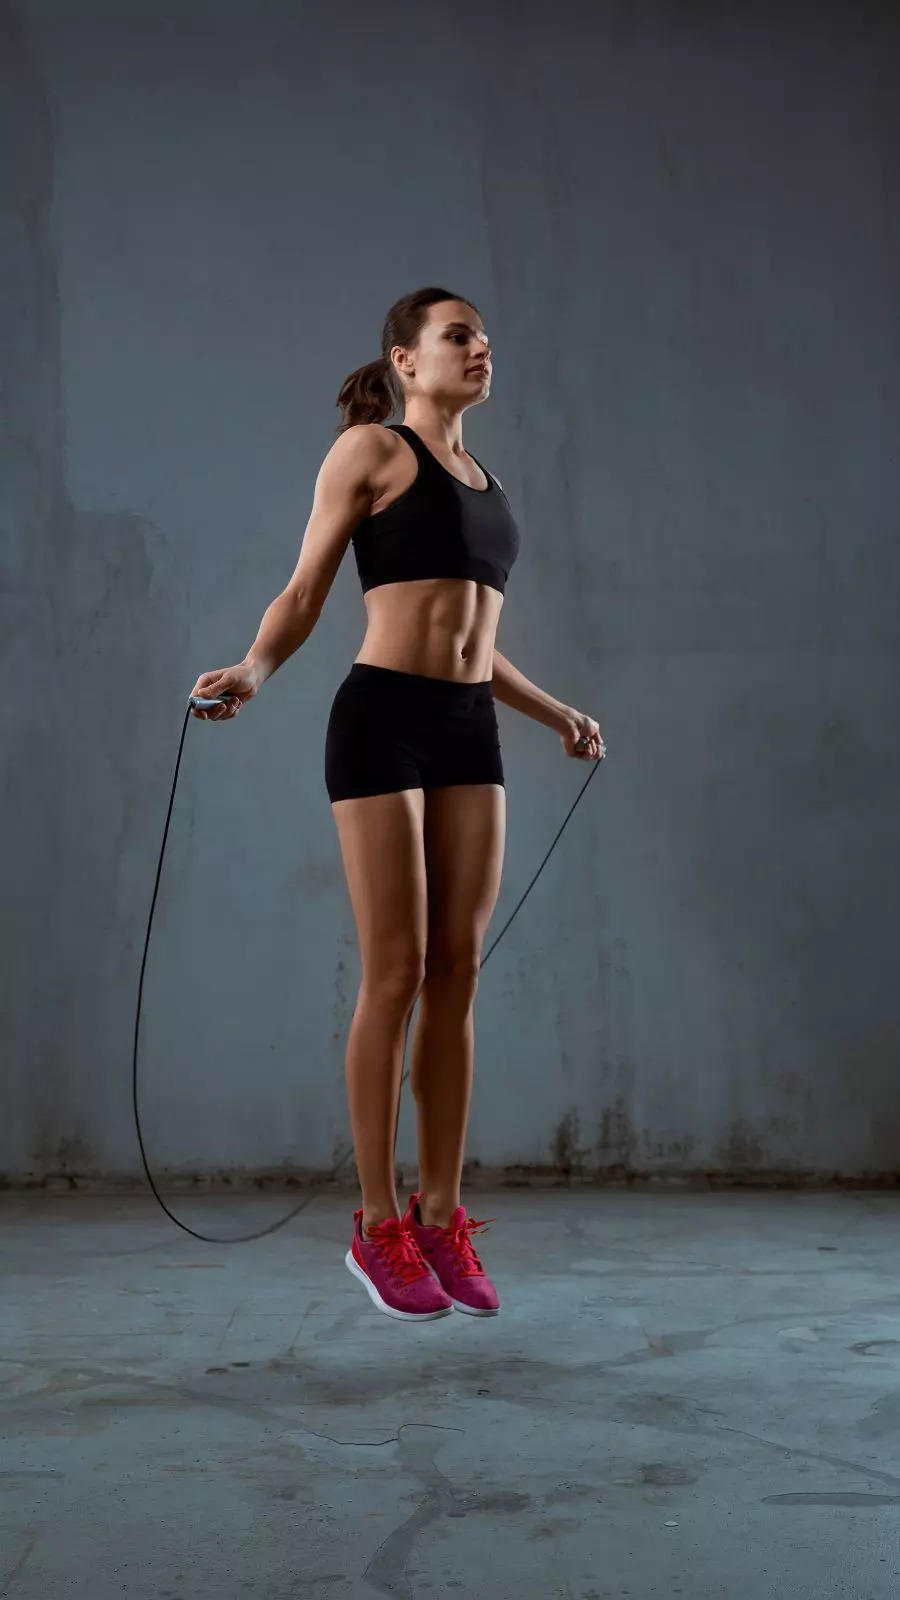 Belly fat burner, stress buster: Amazing benefits of skipping 